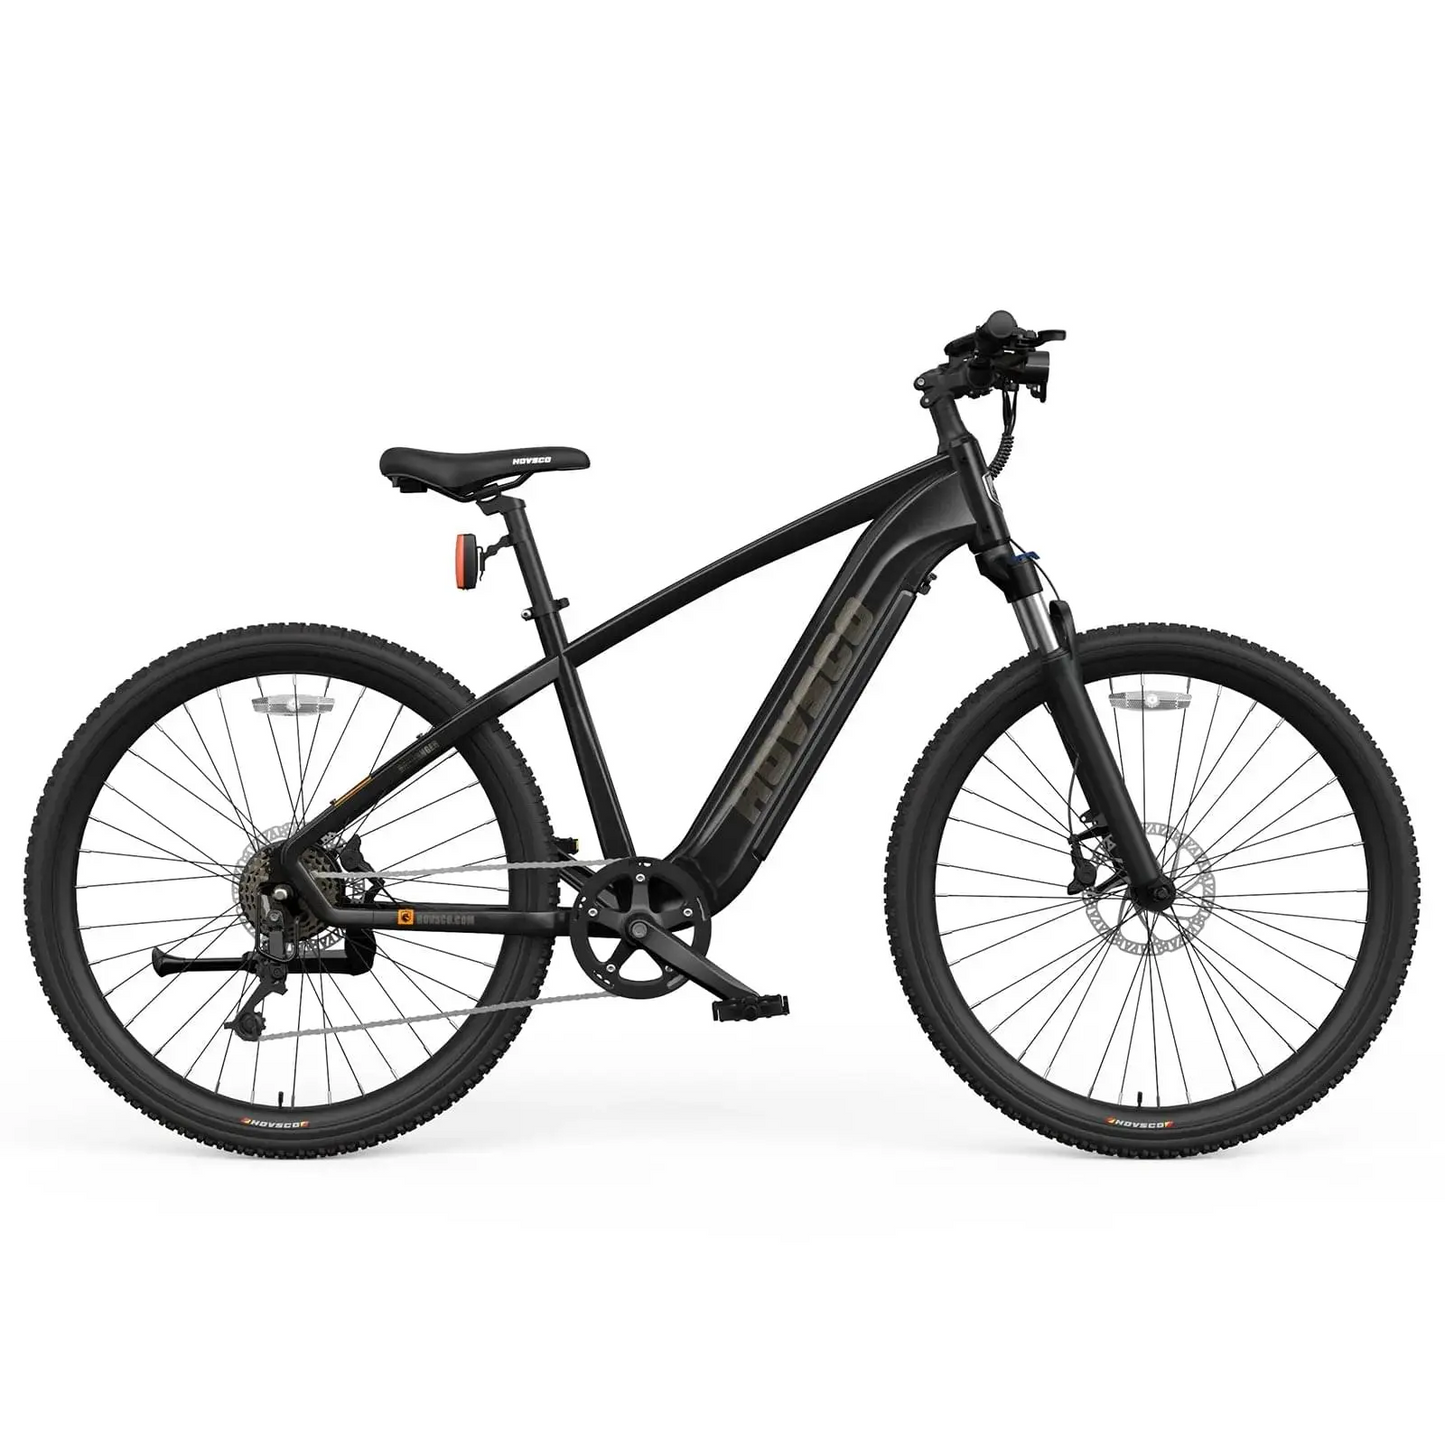 An Hovsco Ranger electric city bike with a front suspension fork on a white background.